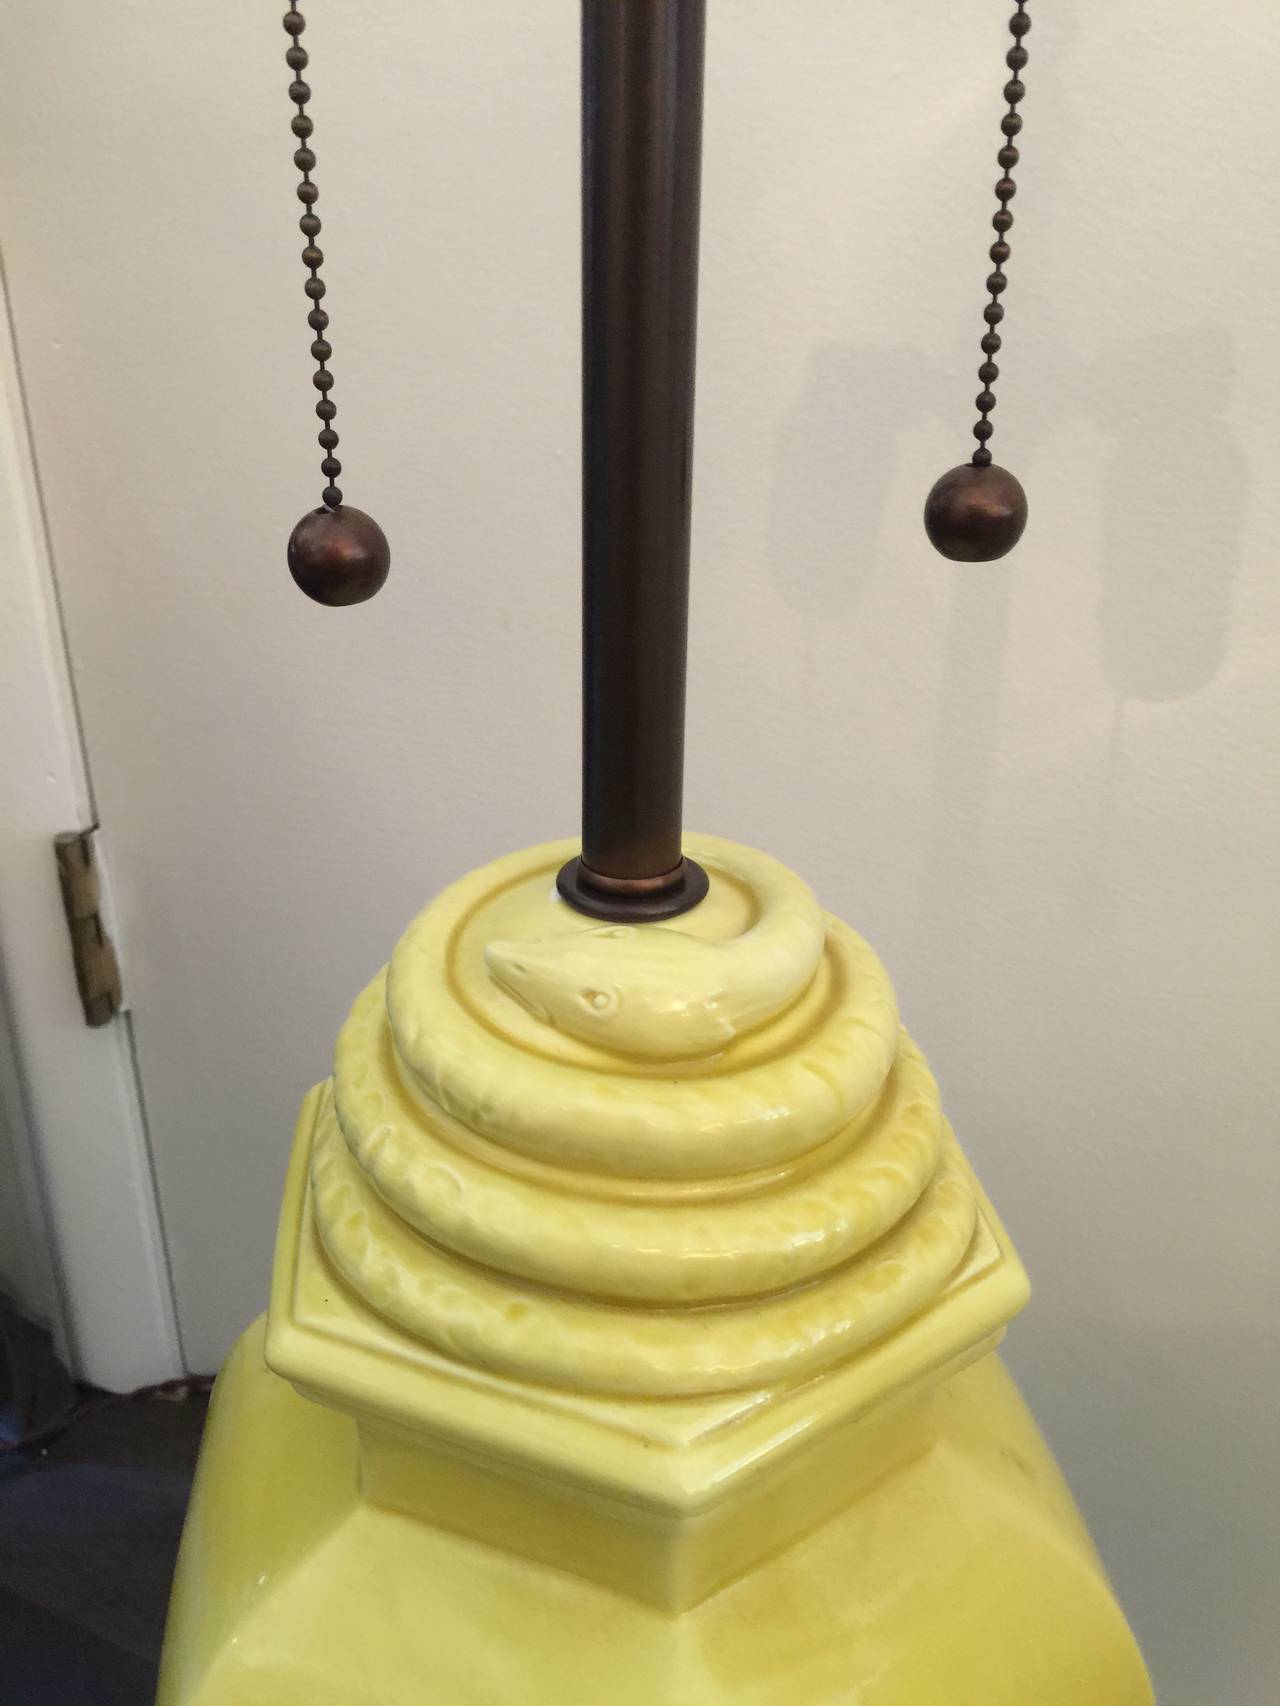 A beautiful shade of citron yellow with hexagonal brass base and hardware. Double sockets, newly rewired, silk cable. 

Yellow lamp base is 19.25